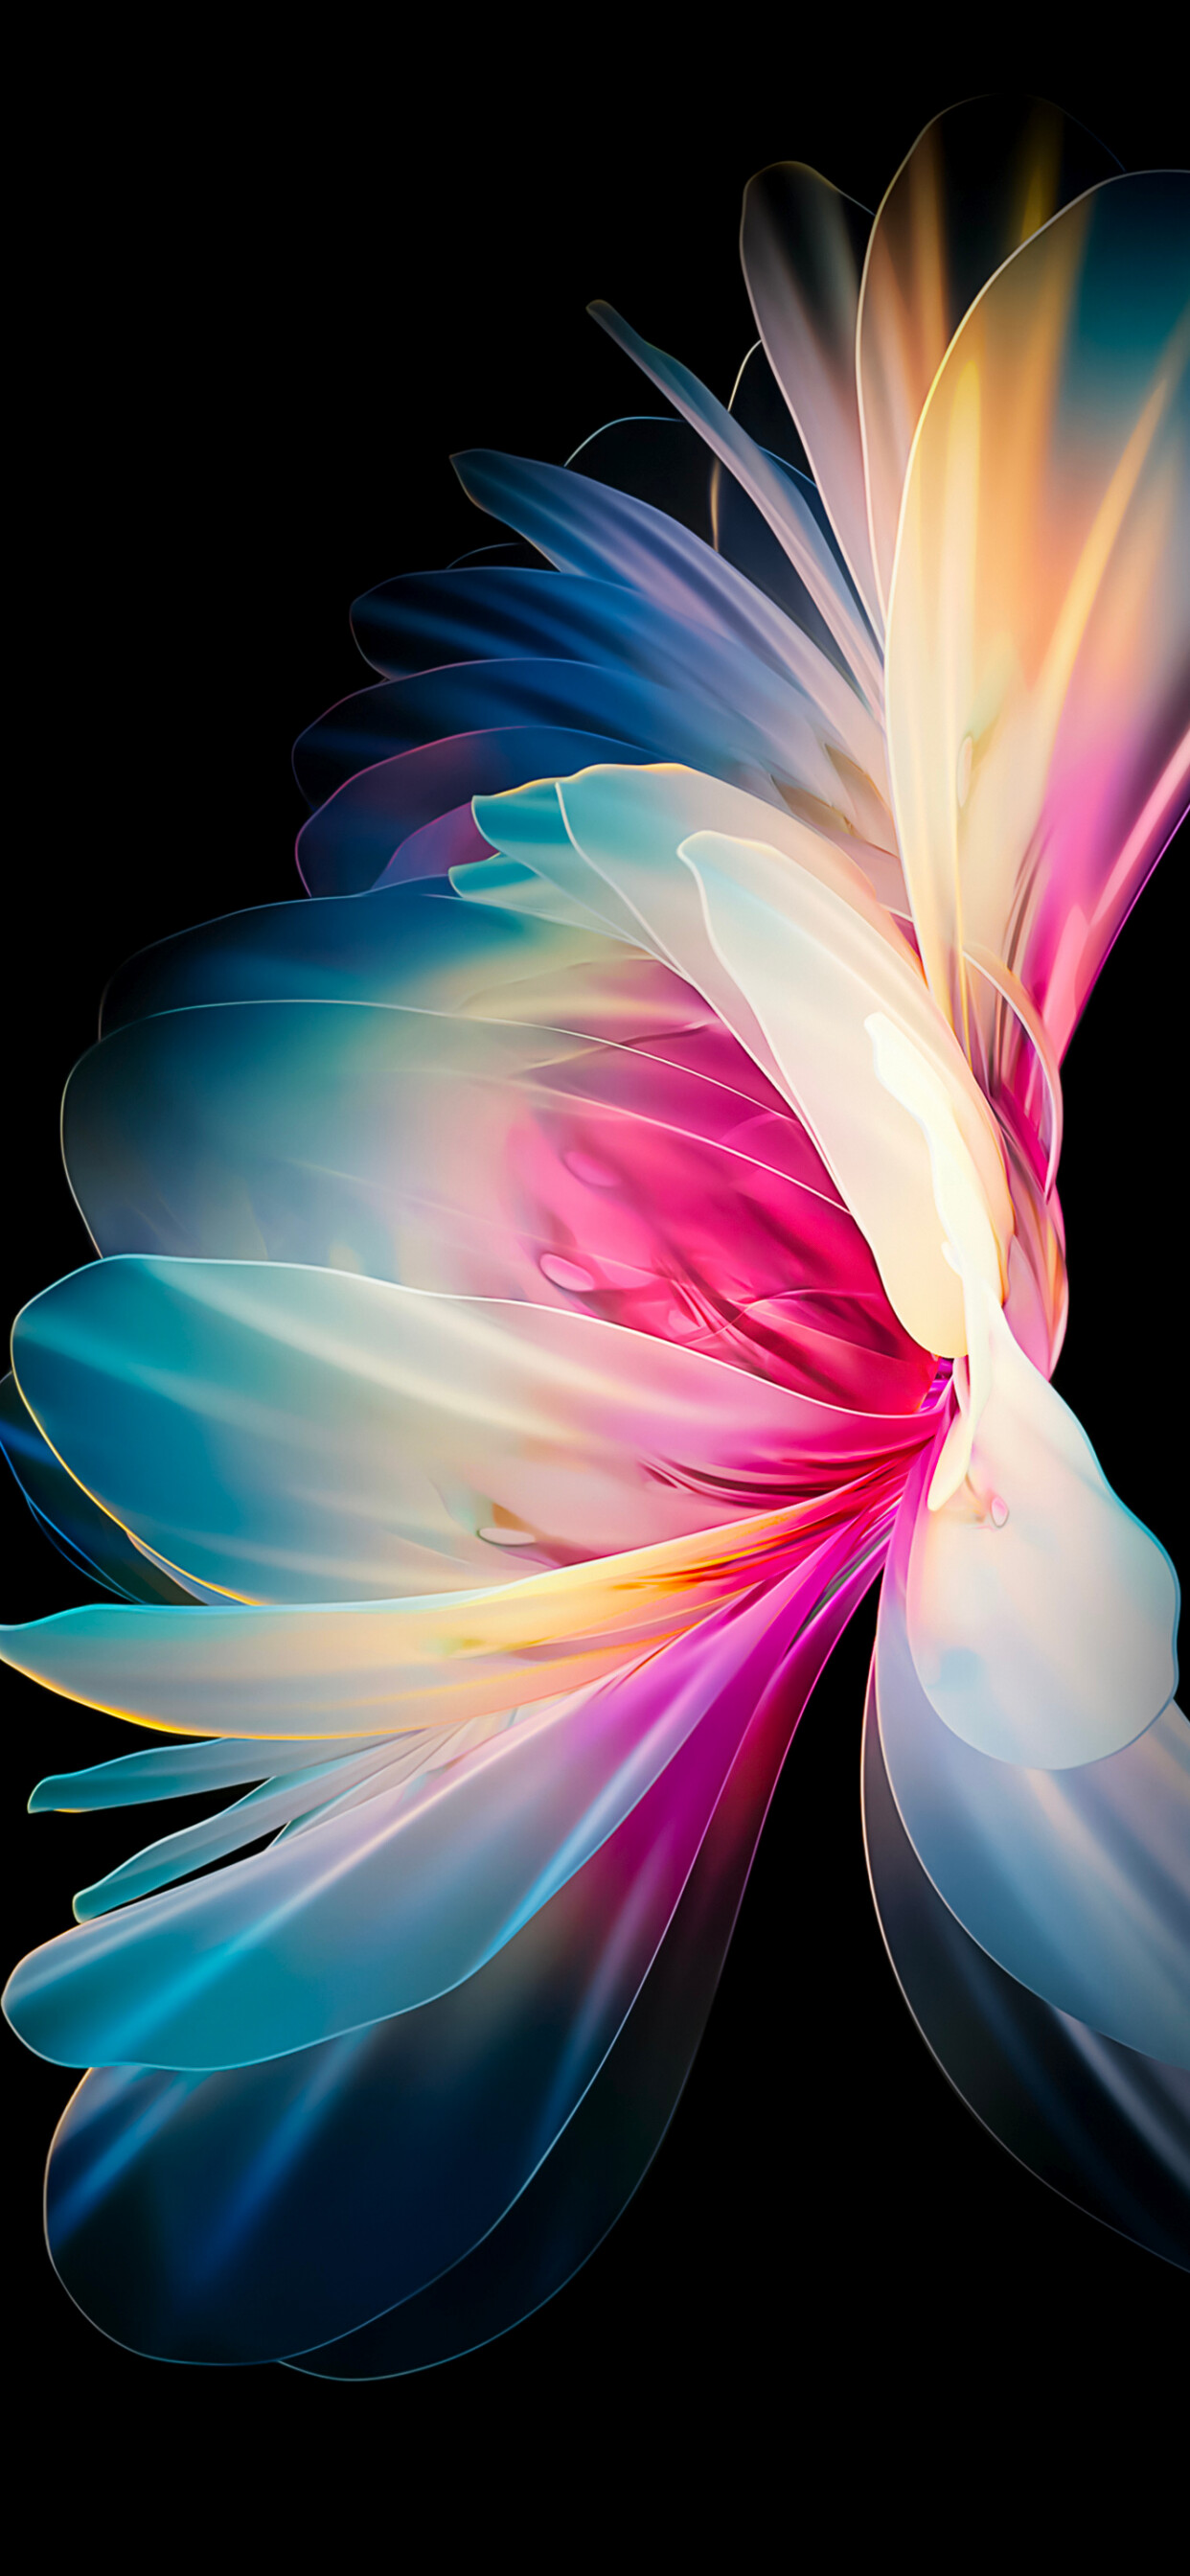 Girly: Blooming plant, Feather-like flower, Soft-to-the-touch blooms, Abstract. 1250x2690 HD Background.